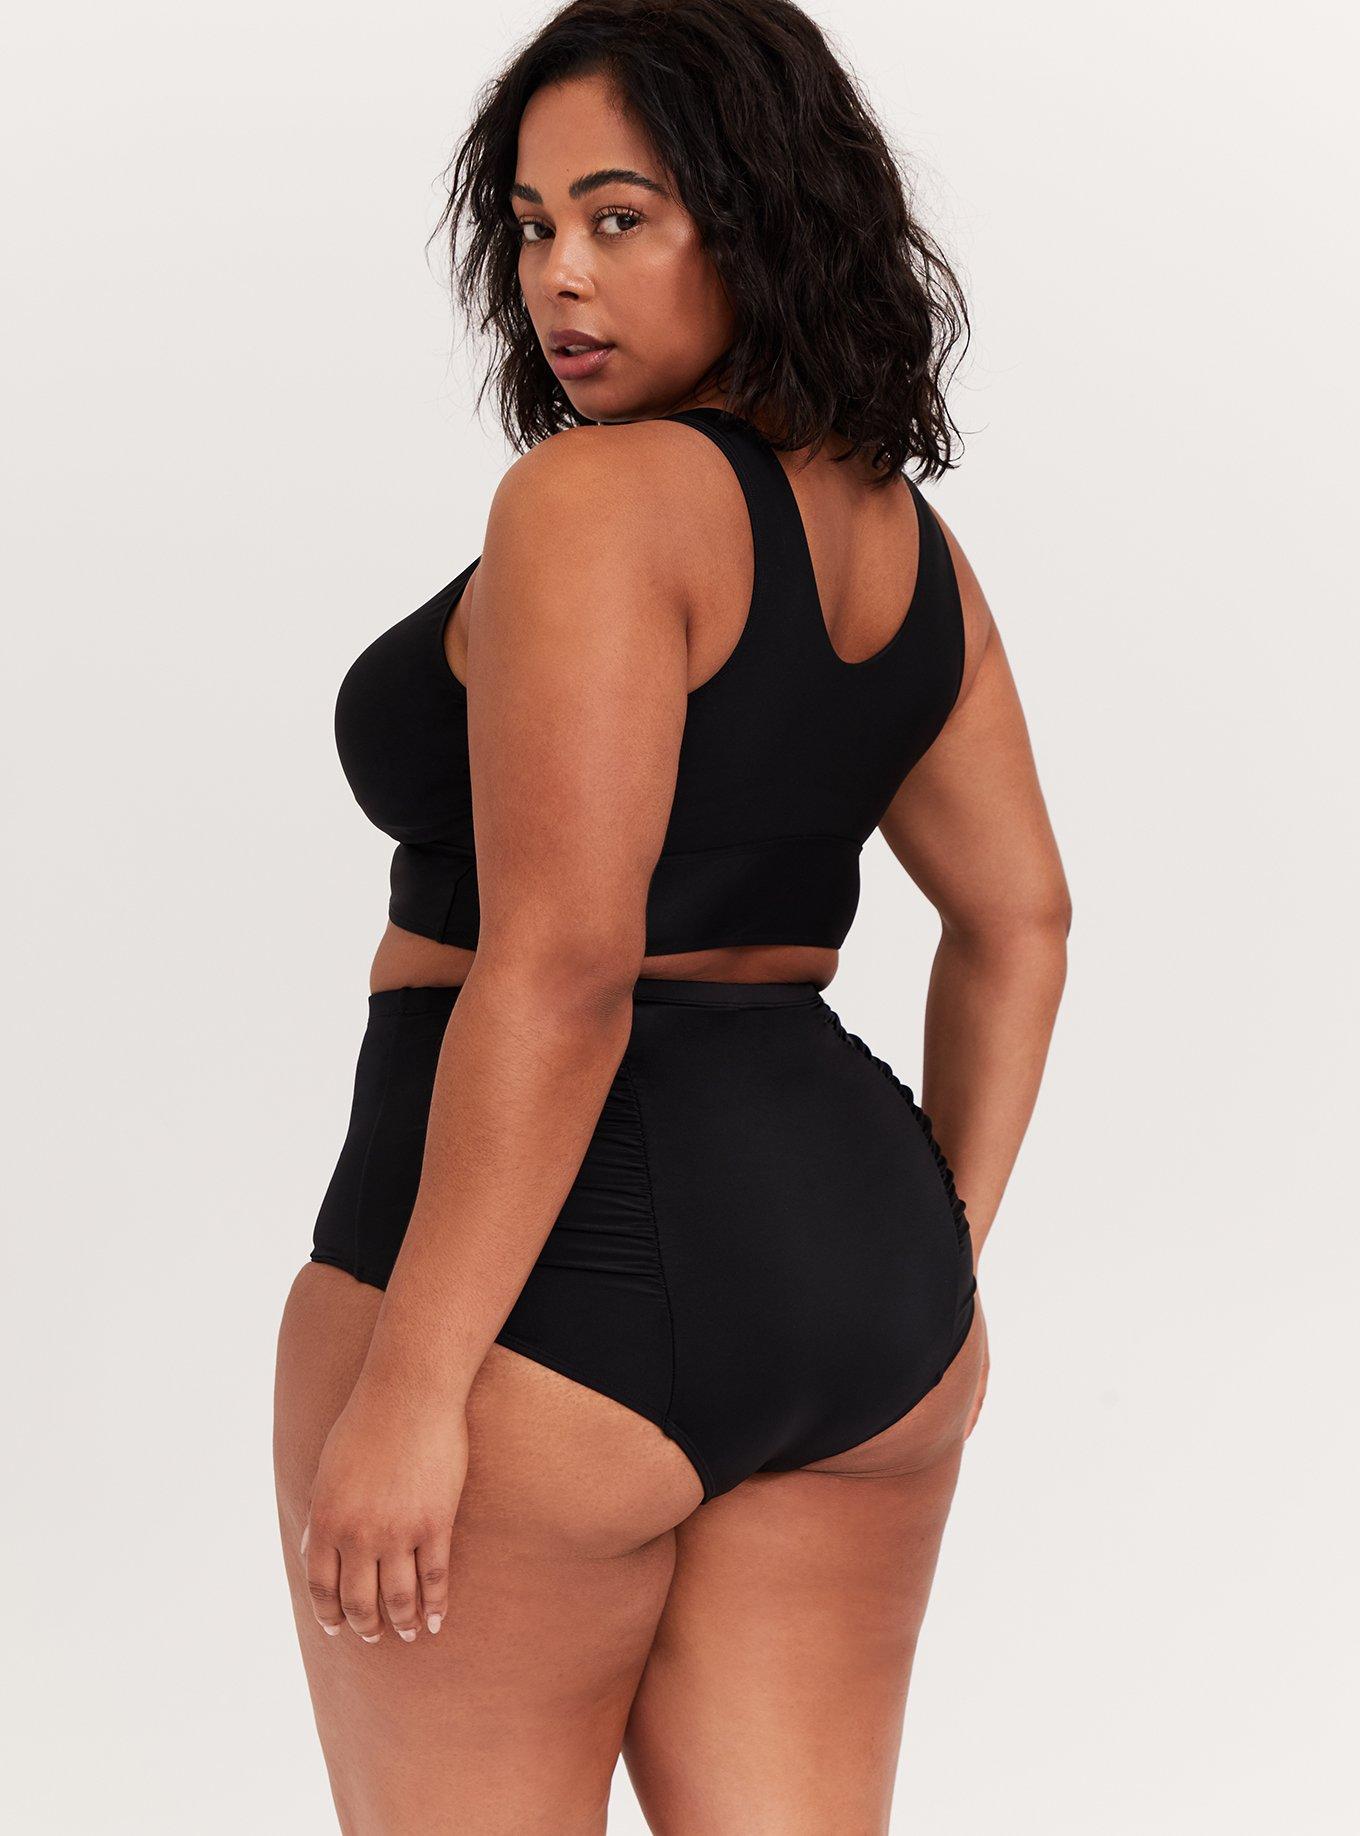 11 Swimsuits That Look Bangin' on Small Busted Ladies  Swimsuits, Plunging one  piece swimsuit, One piece swimsuit